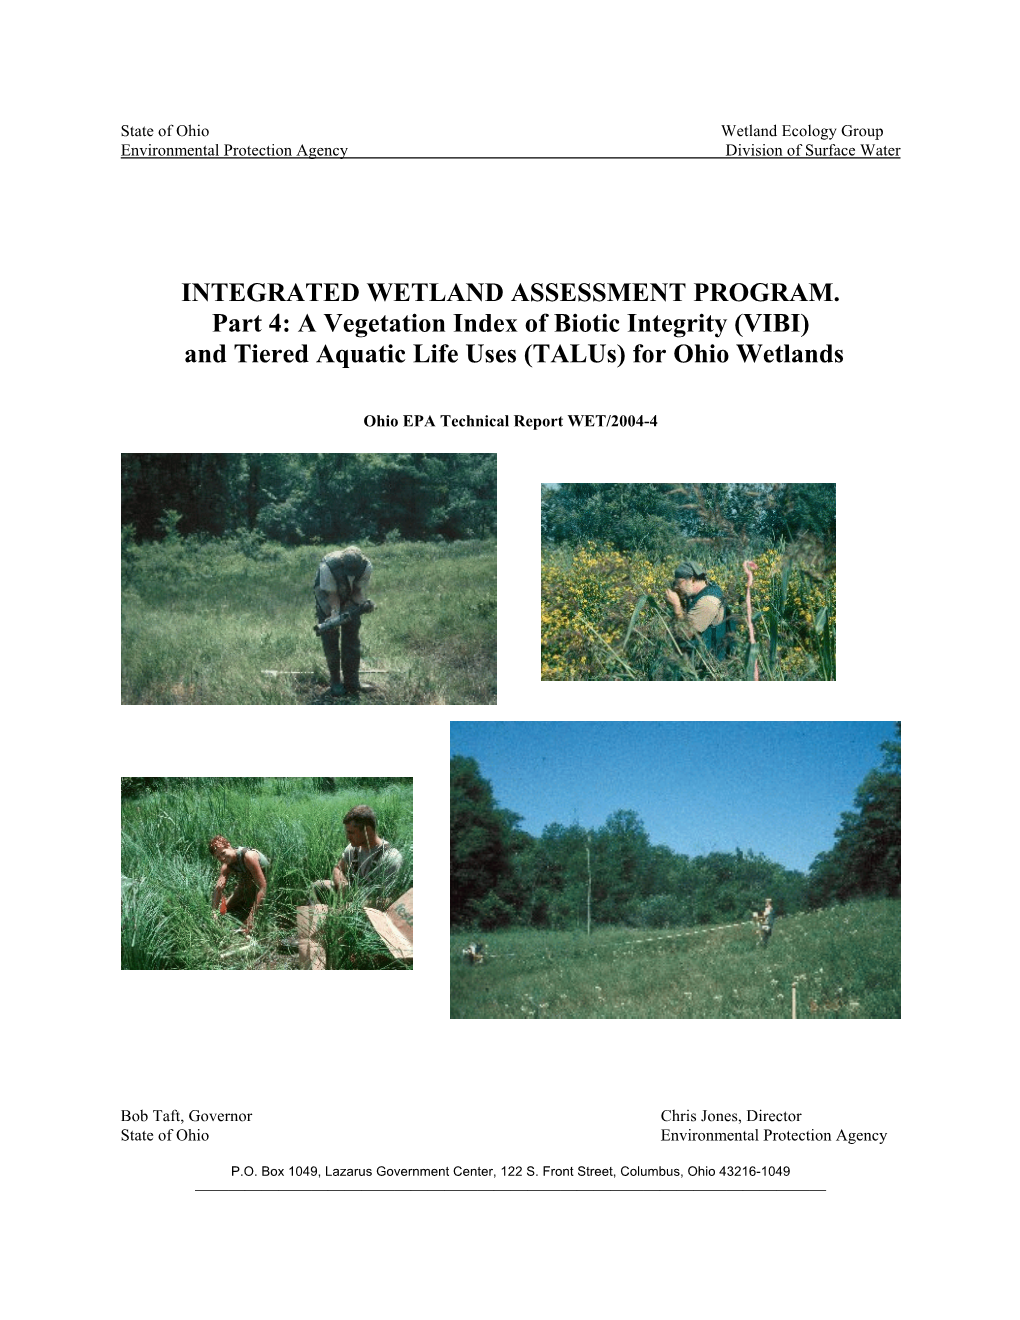 A Vegetation Index of Biotic Integrity (VIBI) and Tiered Aquatic Life Uses (Talus) for Ohio Wetlands